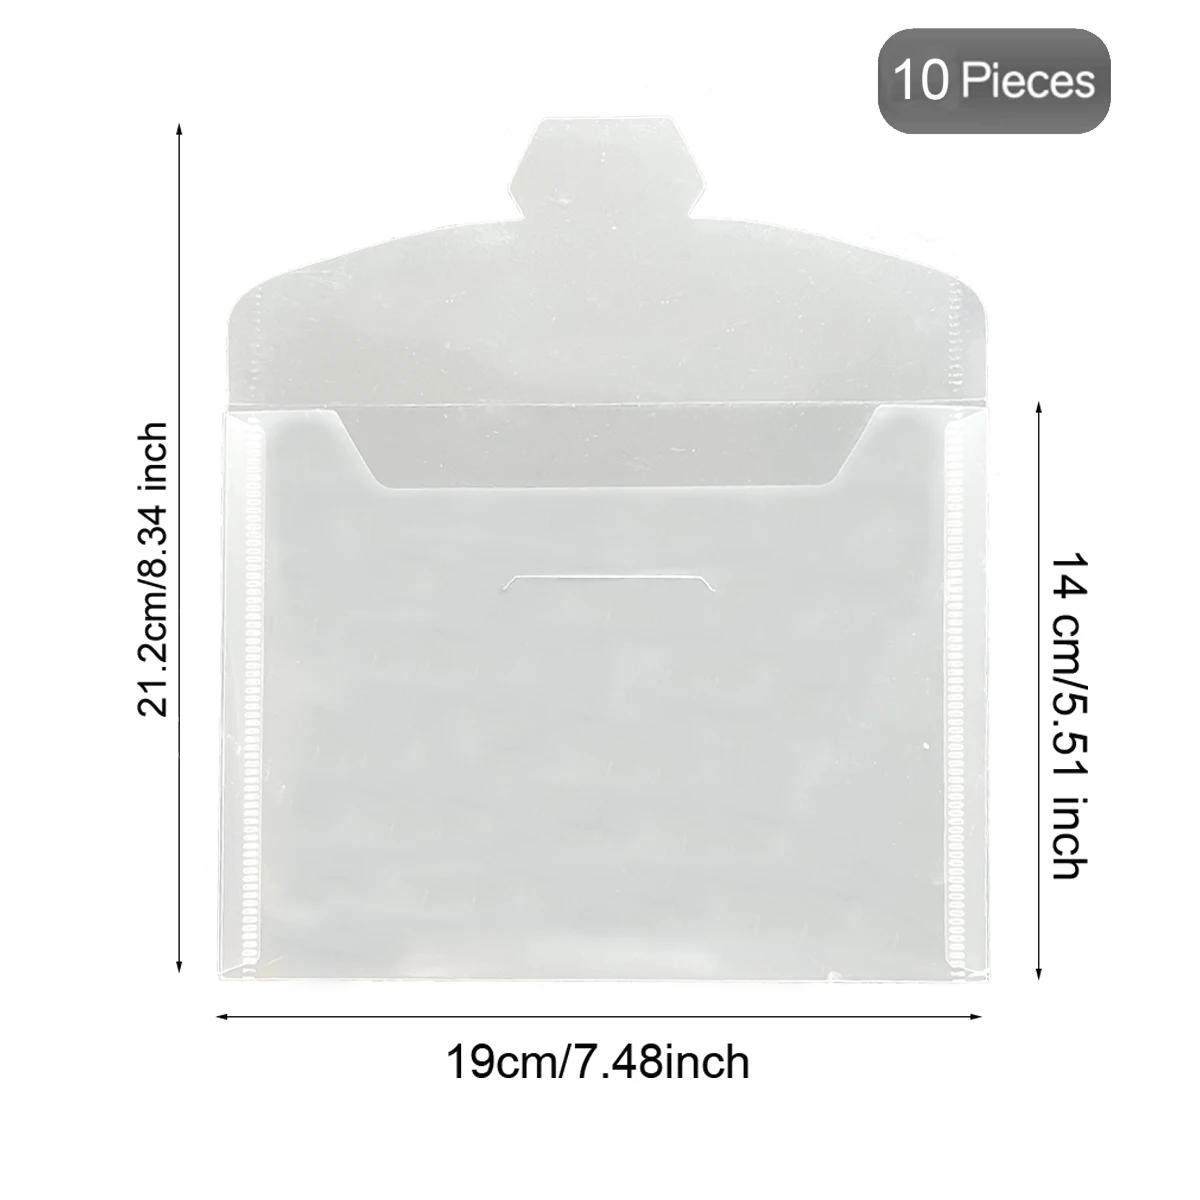 10pcs/set   Sheets Plastic Folder Bags For Storaging Cutting Dies Stamps Organizer Holders 7.5x5.5inch Transparent Bags